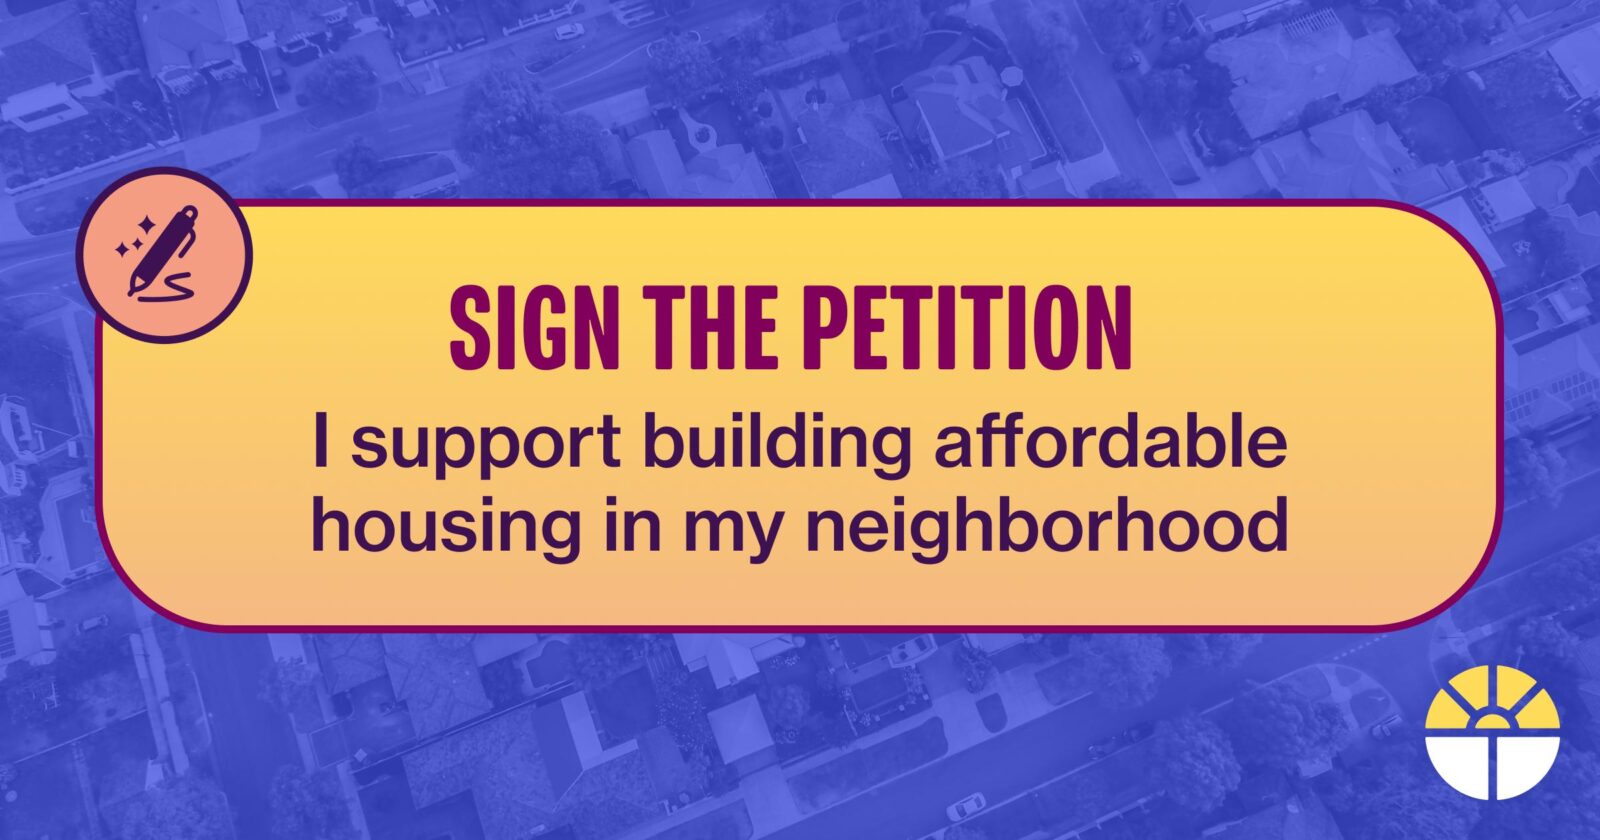 Sign the Petition: I support building affordable housing in my neighborhood.